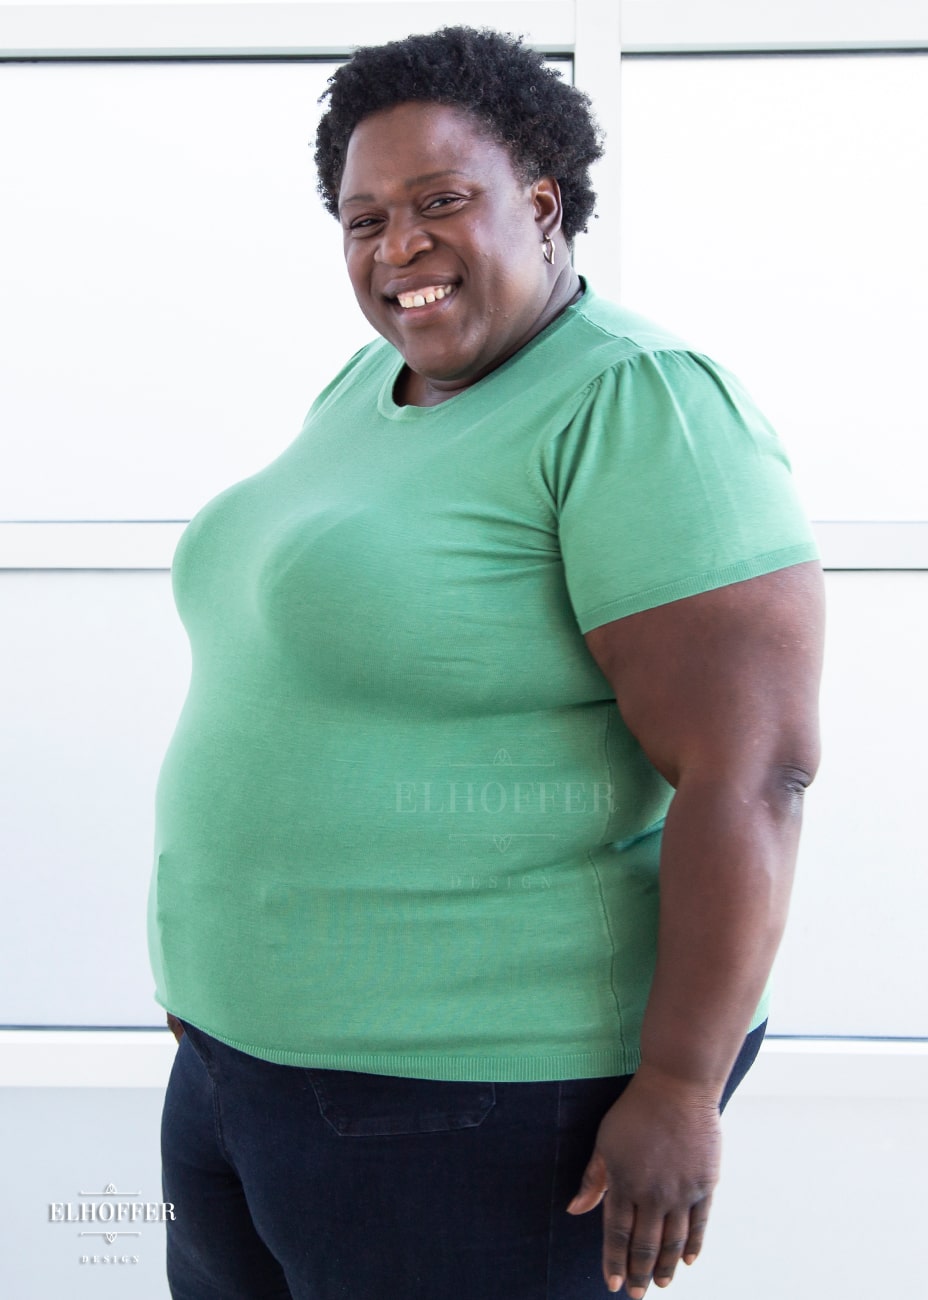 Adalgiza, a medium dark skinned 4xl model with short dark super curly hair, is smiling while wearing a short sleeve light weight sage green knit top. The top hits about mid hip in length and the sleeves have pleated gathering at the shoulders.